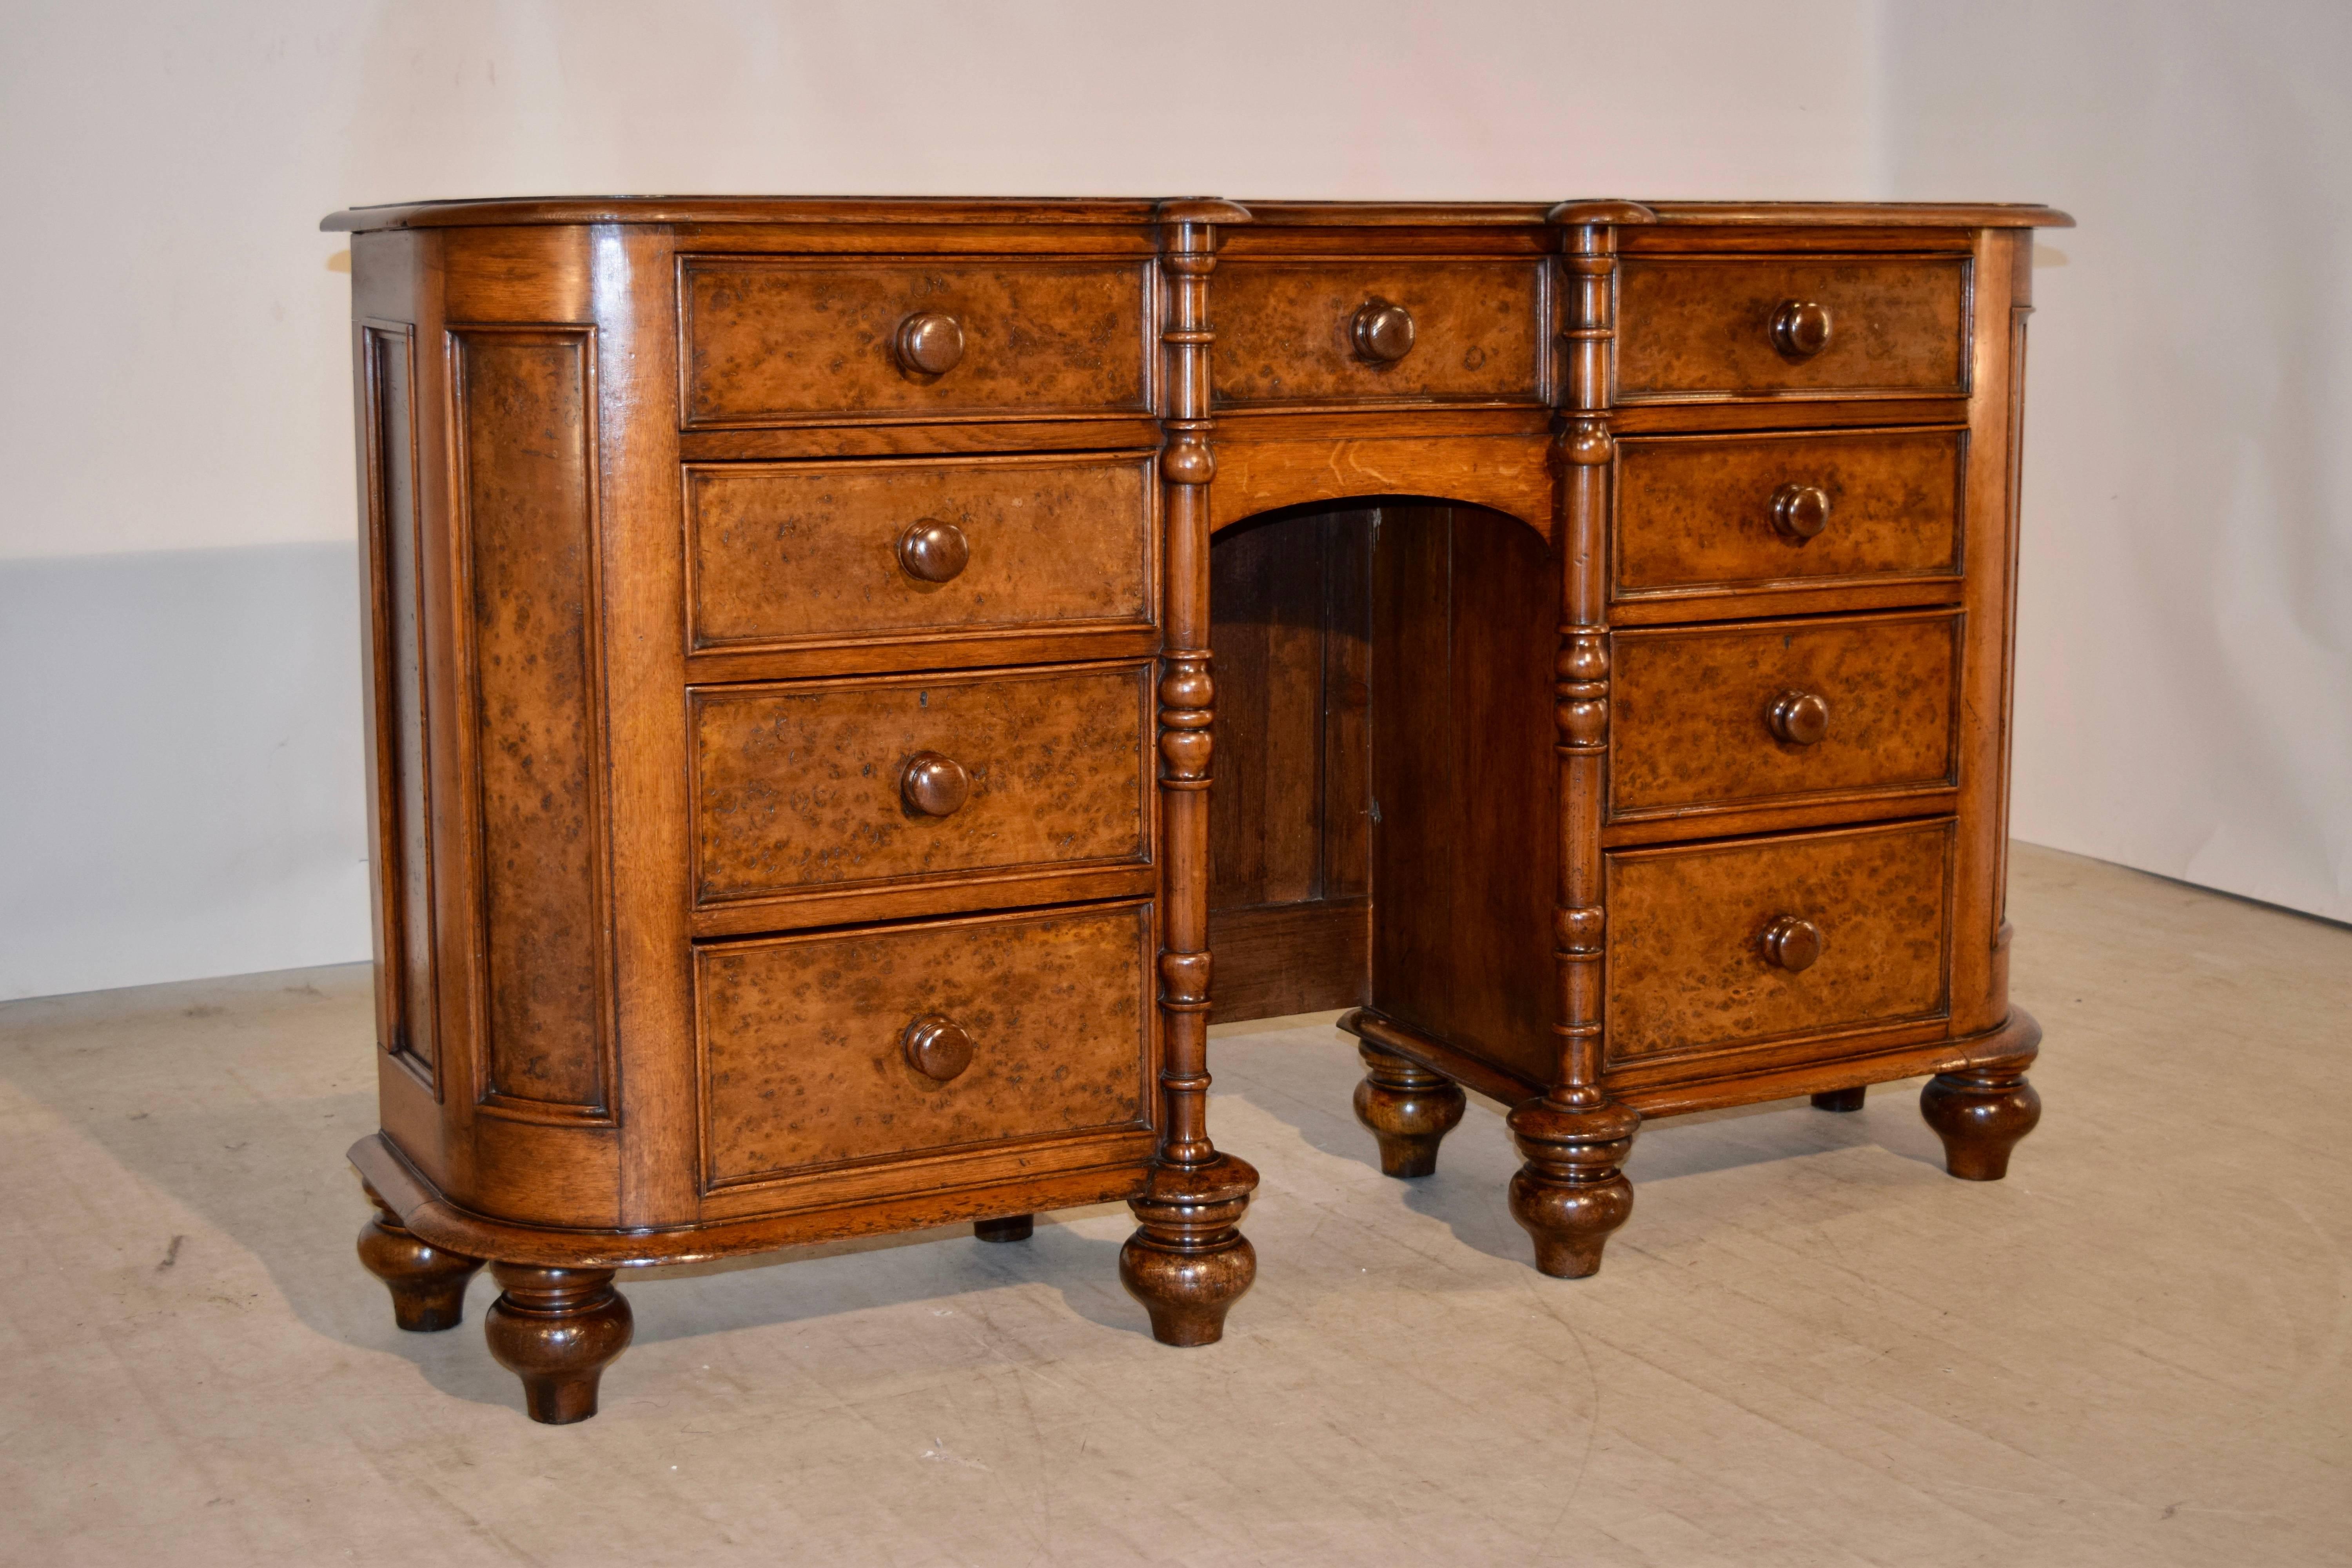 19th century English sideboard made from bird's-eye maple and oak. The top is beveled around the edge and follows down to the case, which contains a wide single drawer with three draw fronts, over two banks of three drawers each. These are flanking